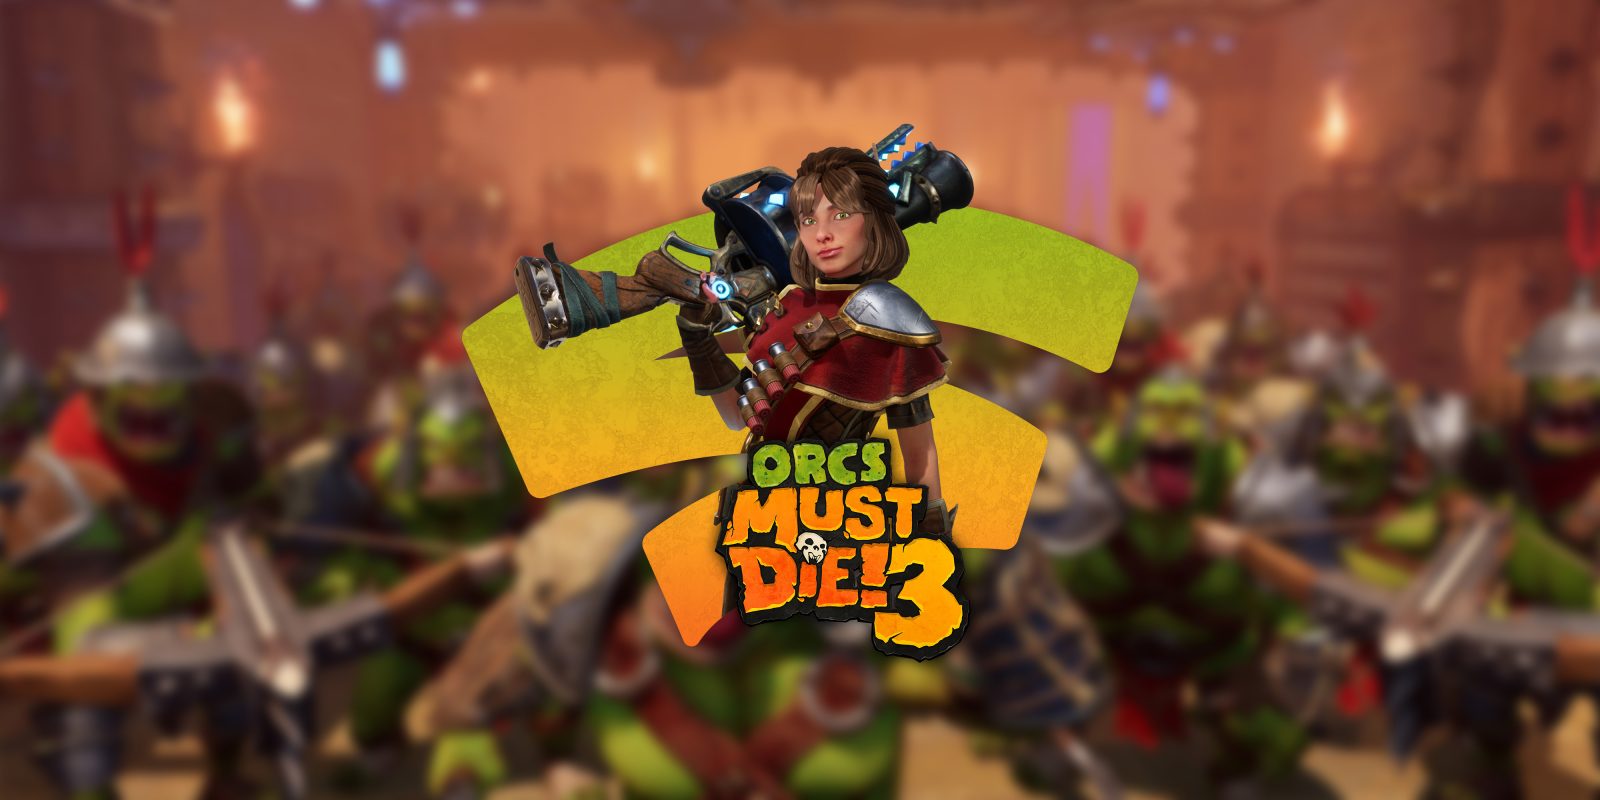 Former Stadia exclusive Orcs Must Die! 3 is currently free on Epic Games Store